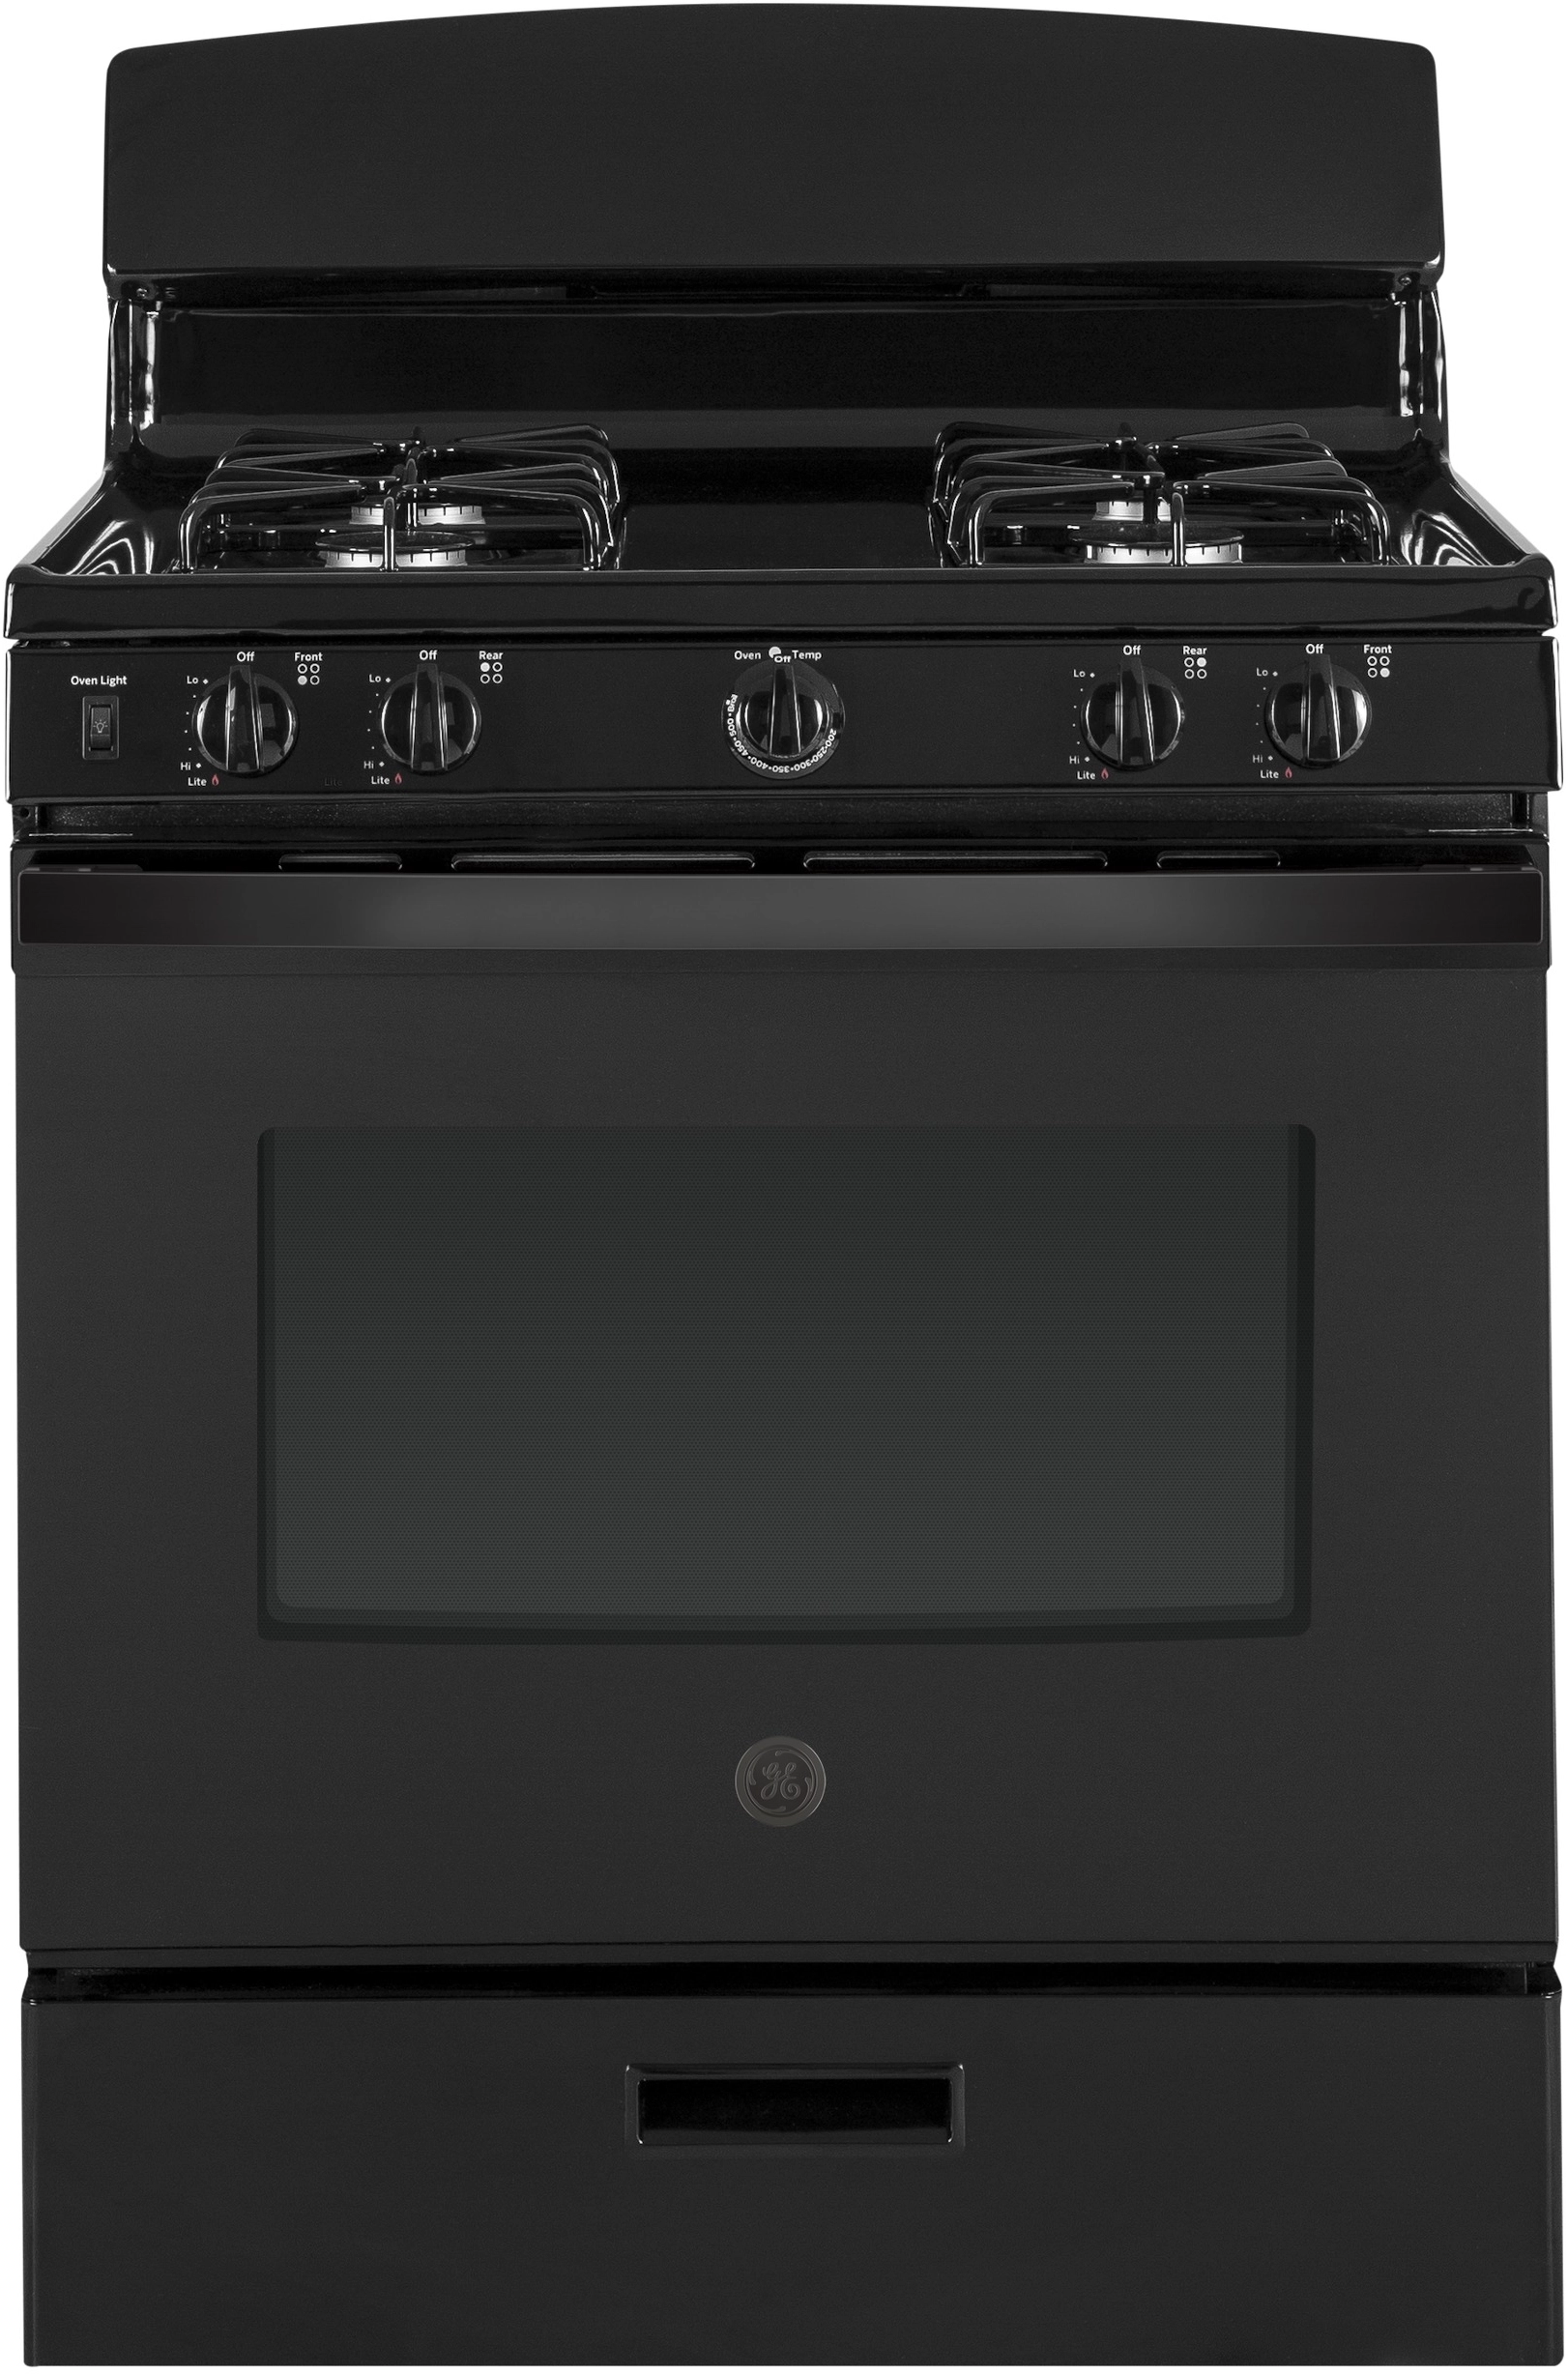 General Electric 30 Inch Freestanding Gas Range with Sealed Burners